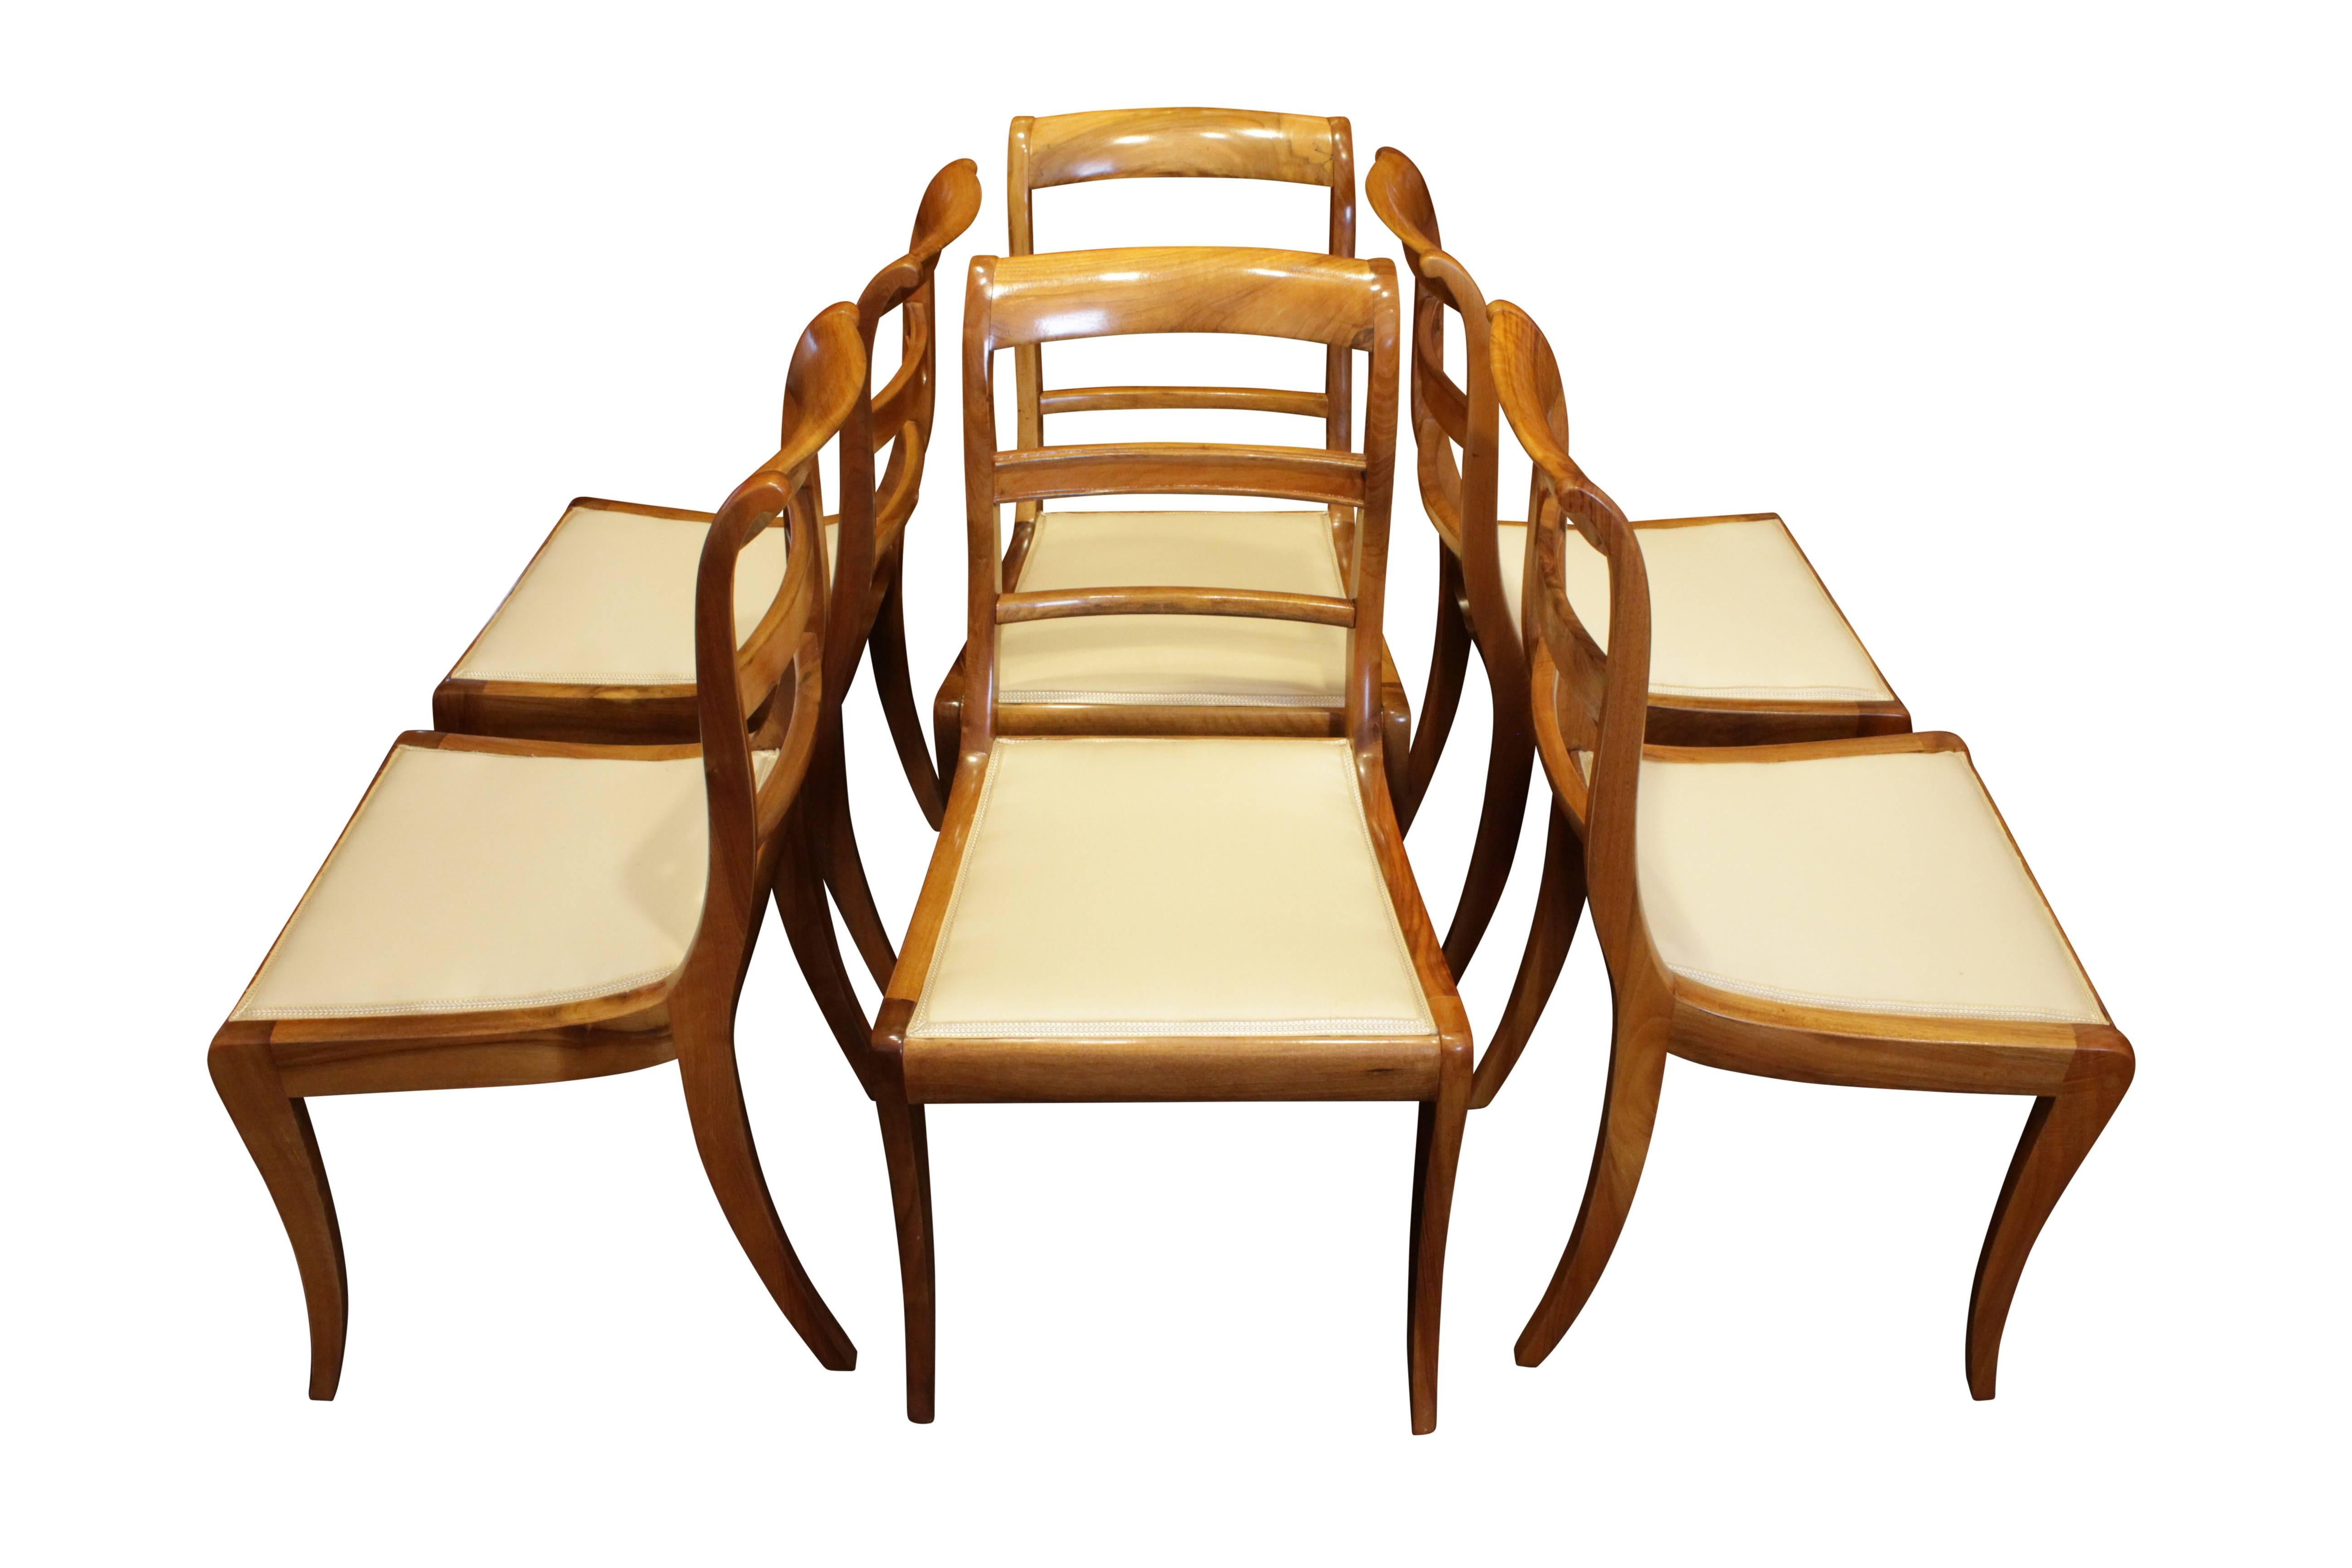 Set of six chairs, Biedermeier, solid walnut-wood. The chairs were new re-upholstered. Measure: Seat height 42 cm.